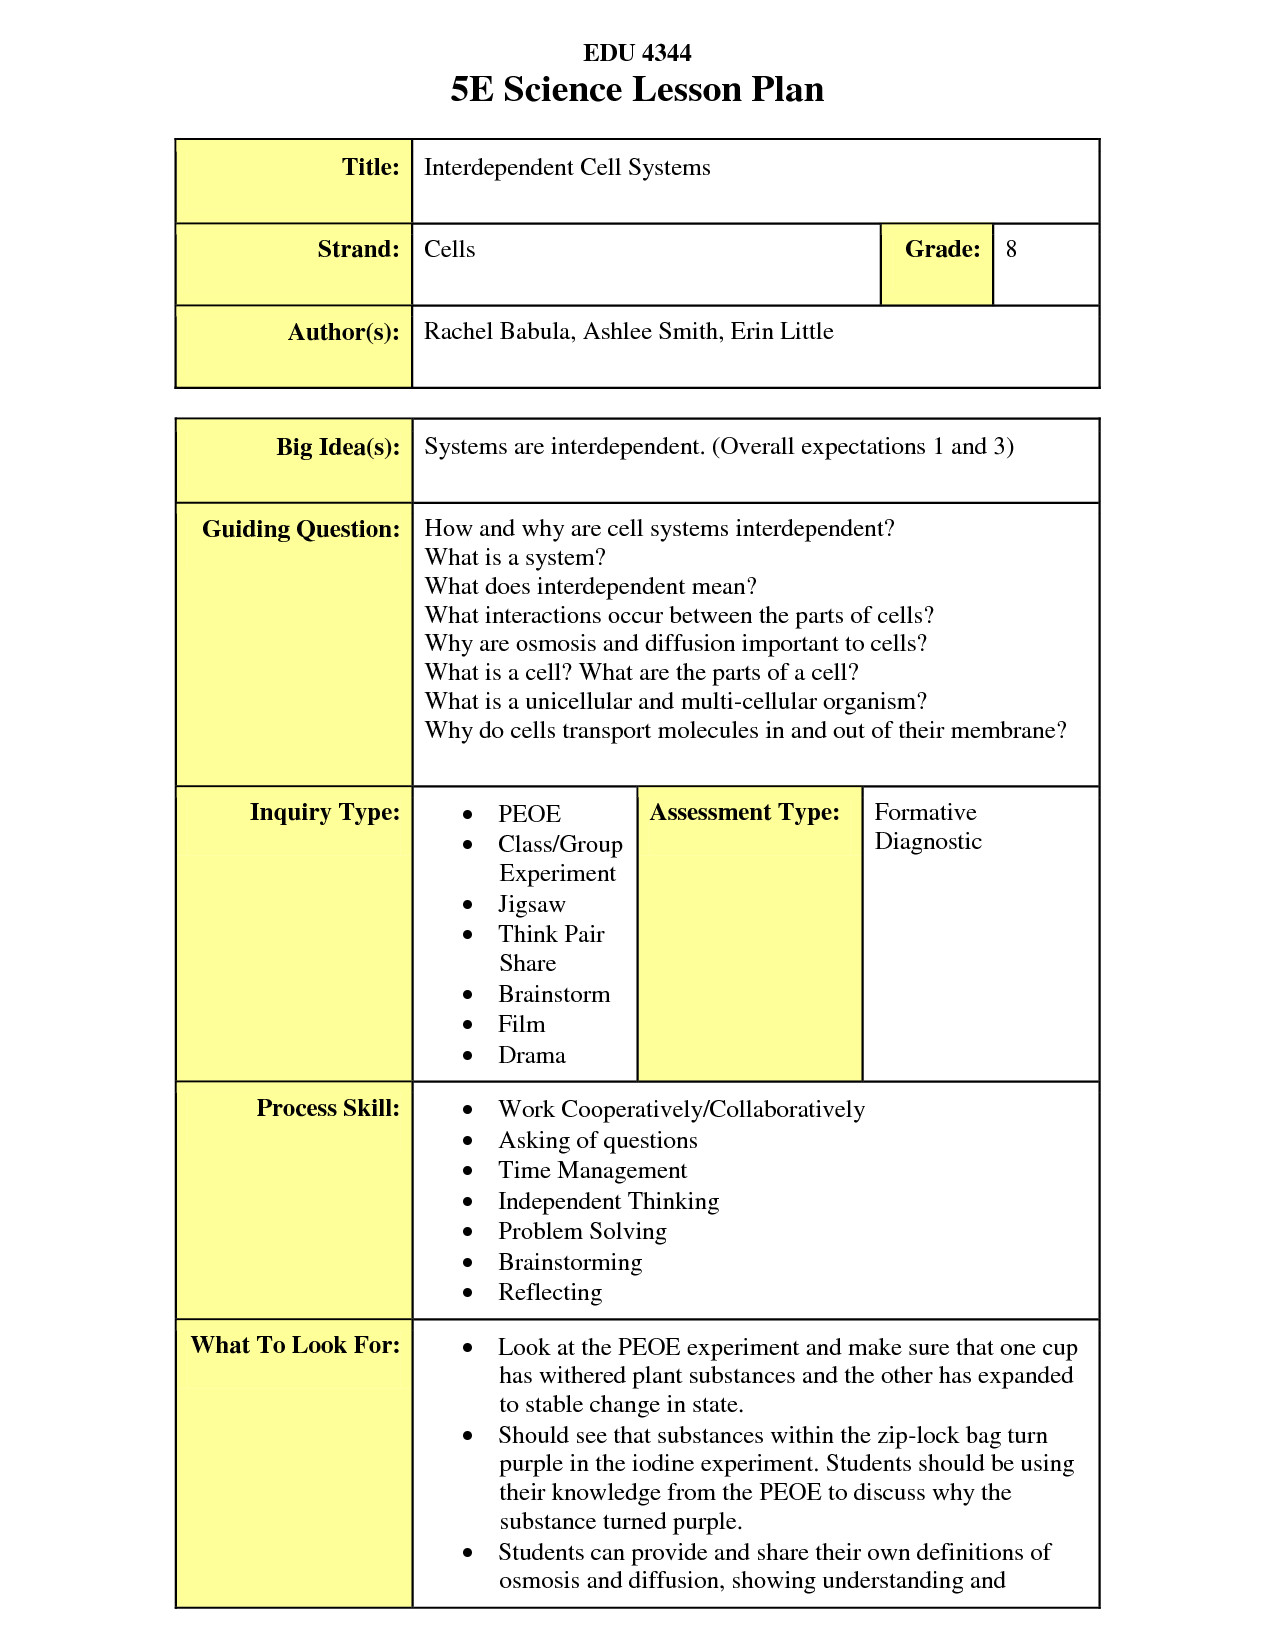 5e Lesson Plan Examples the 5e Lesson Plan is An Extremely Useful Way Of Planning